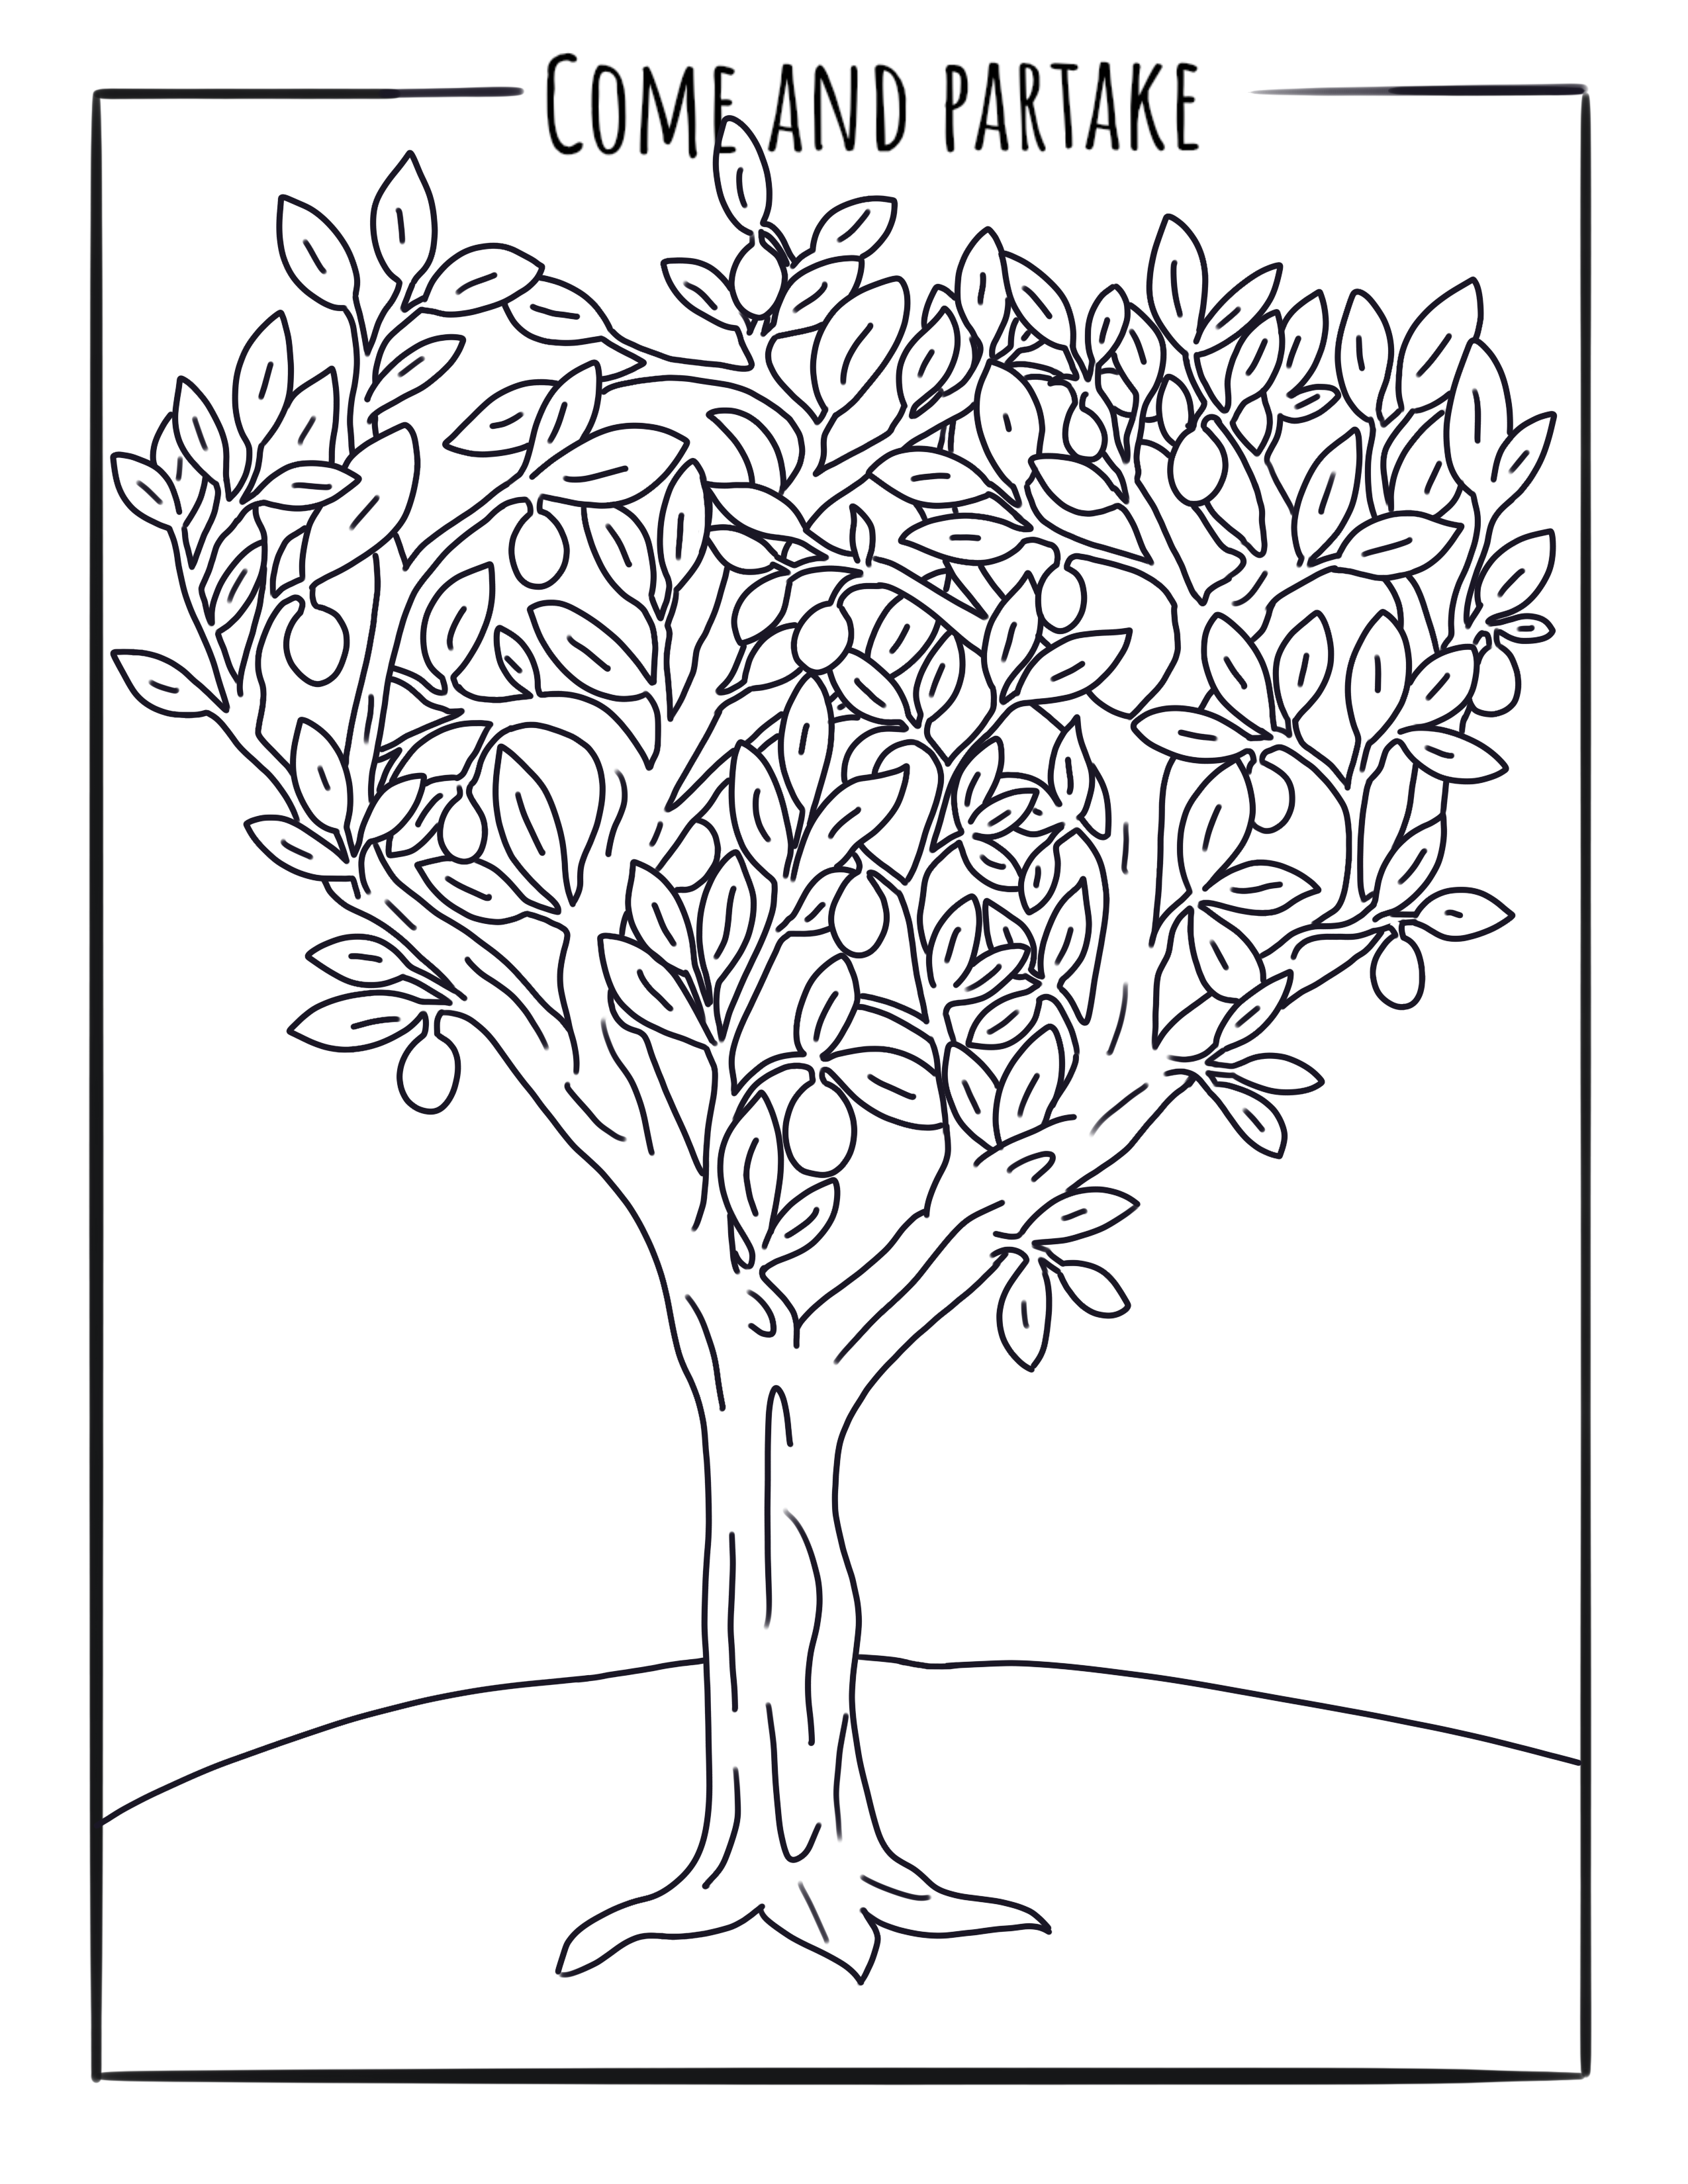 10 Coloring Pages for General Conference